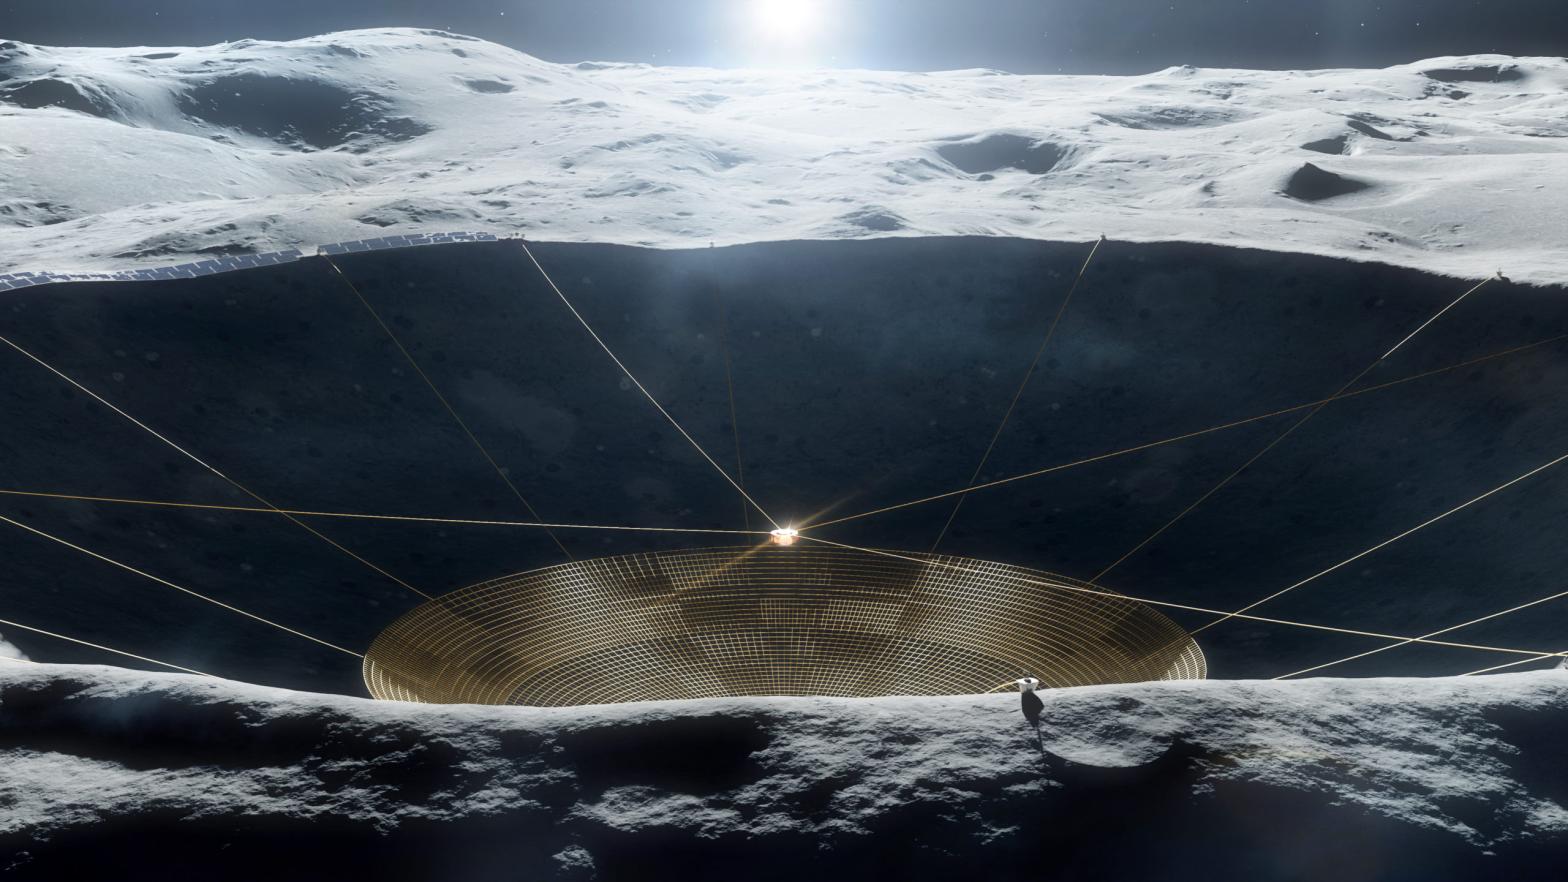 Artist's conception of a radio dish built inside the crater on the far side of the Moon.  (Illustration: Vladimir Vustyansky)